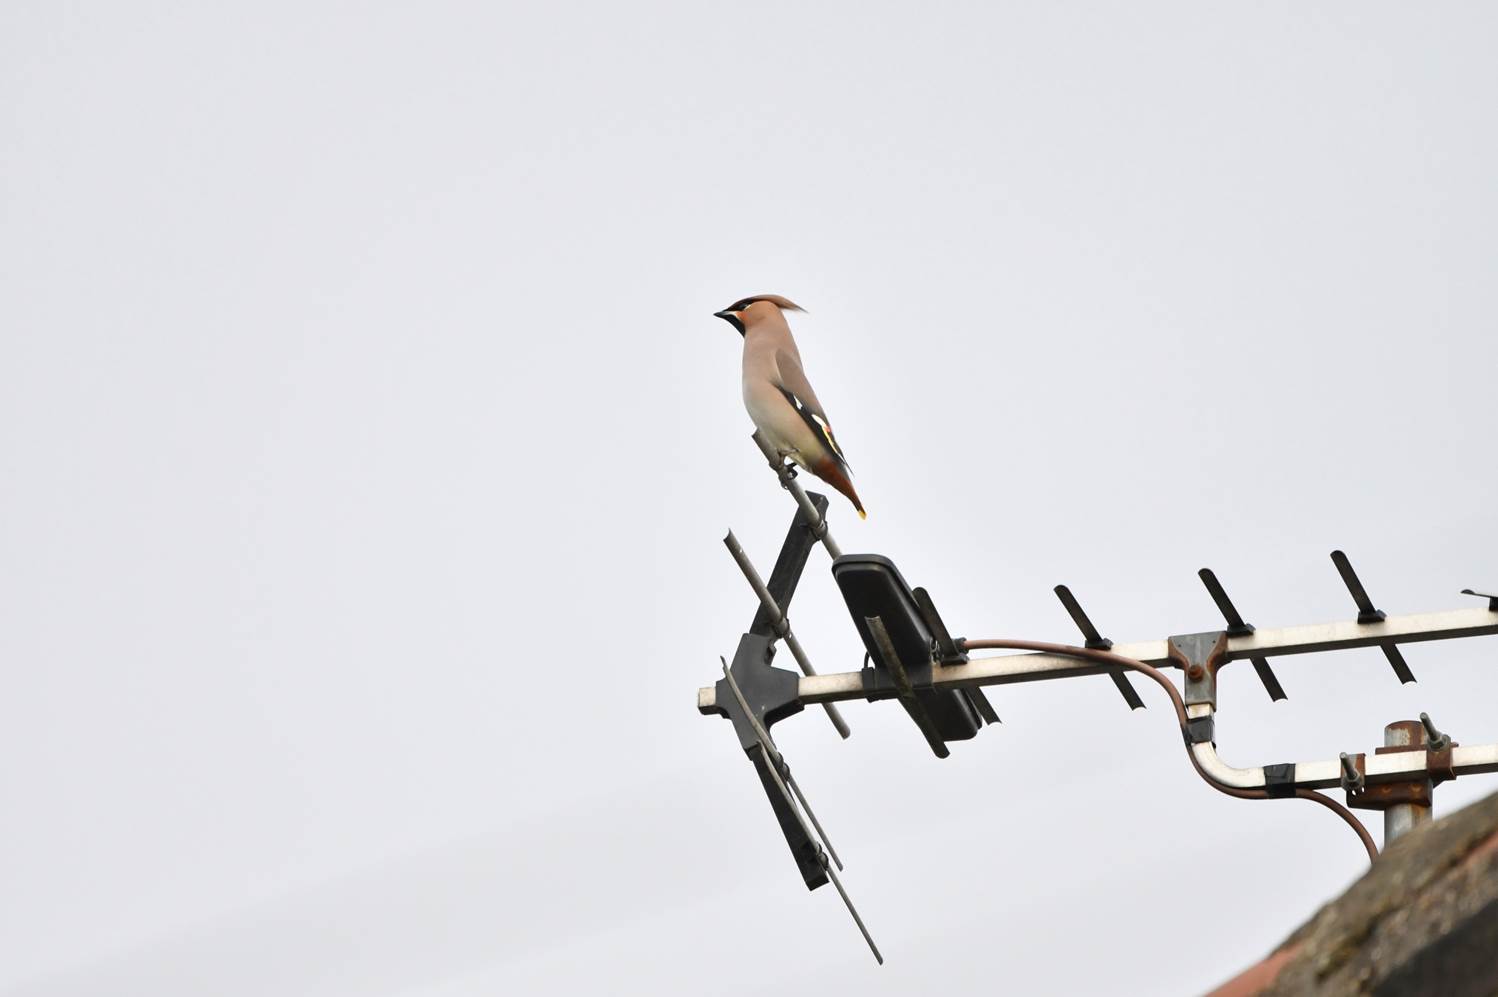 A bird perched on a antenna

Description automatically generated